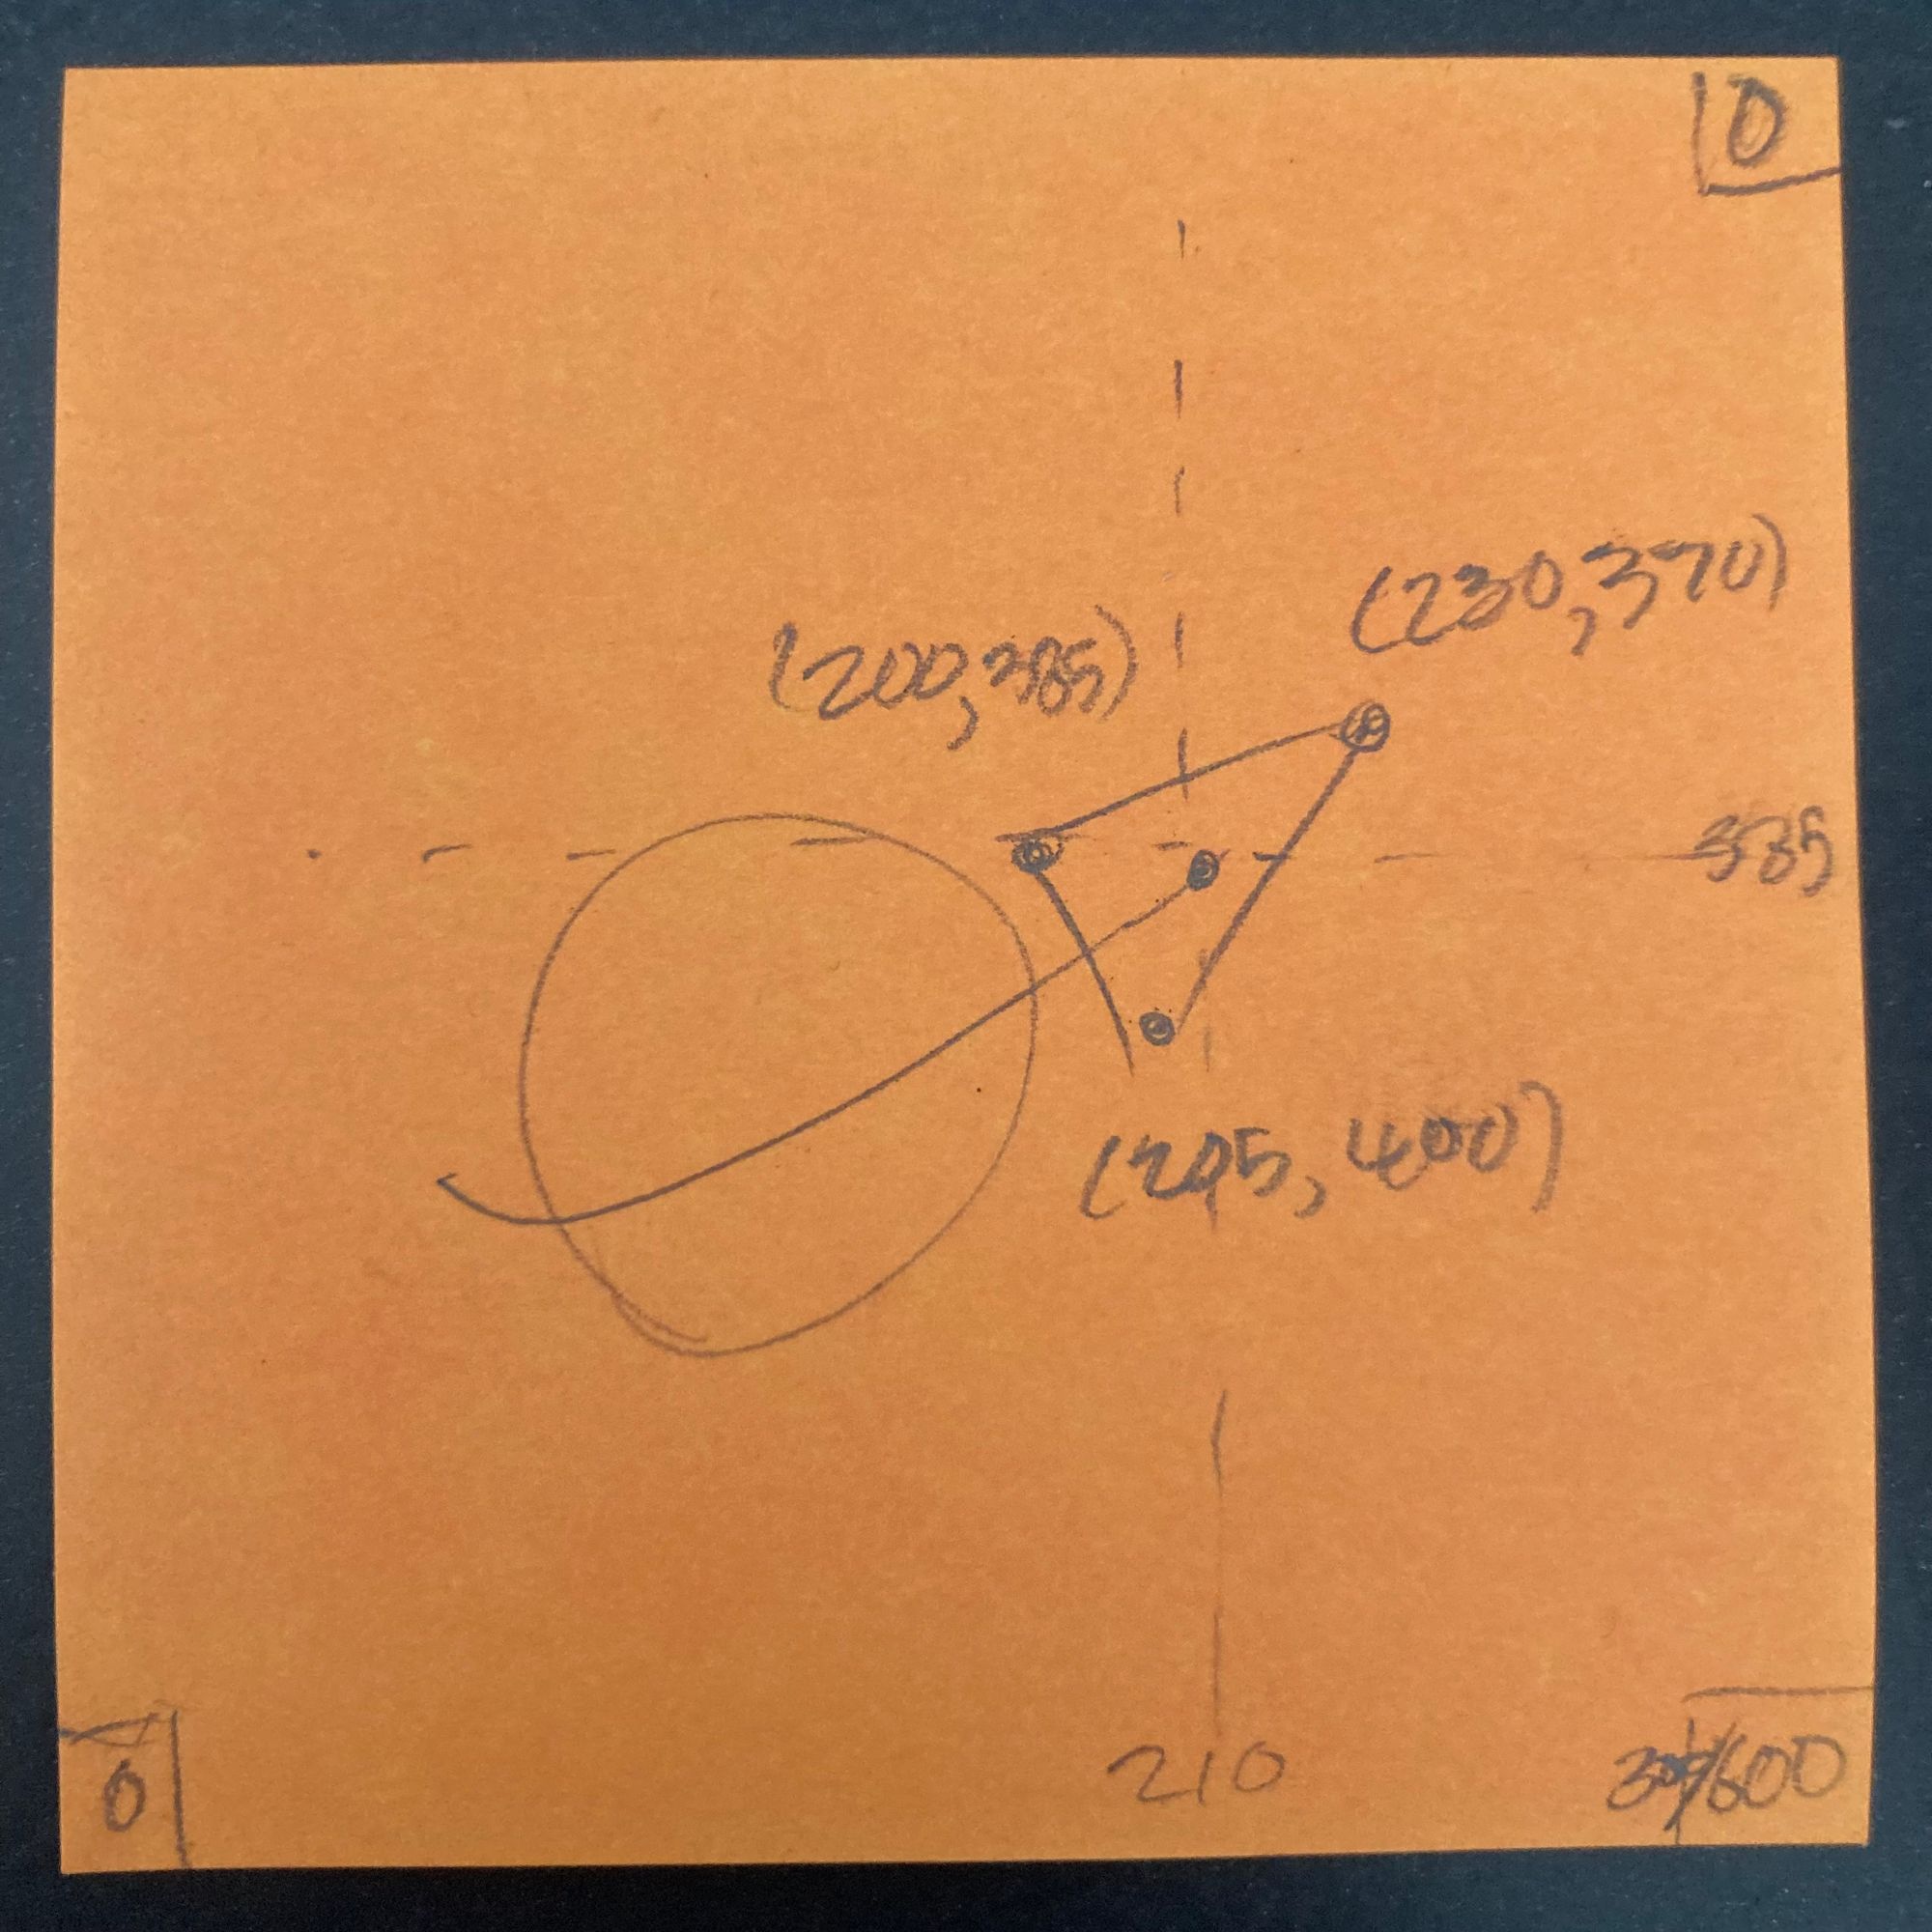 A sticky note I used to roughly visualize a set of coordinates for the triangle in the logo.